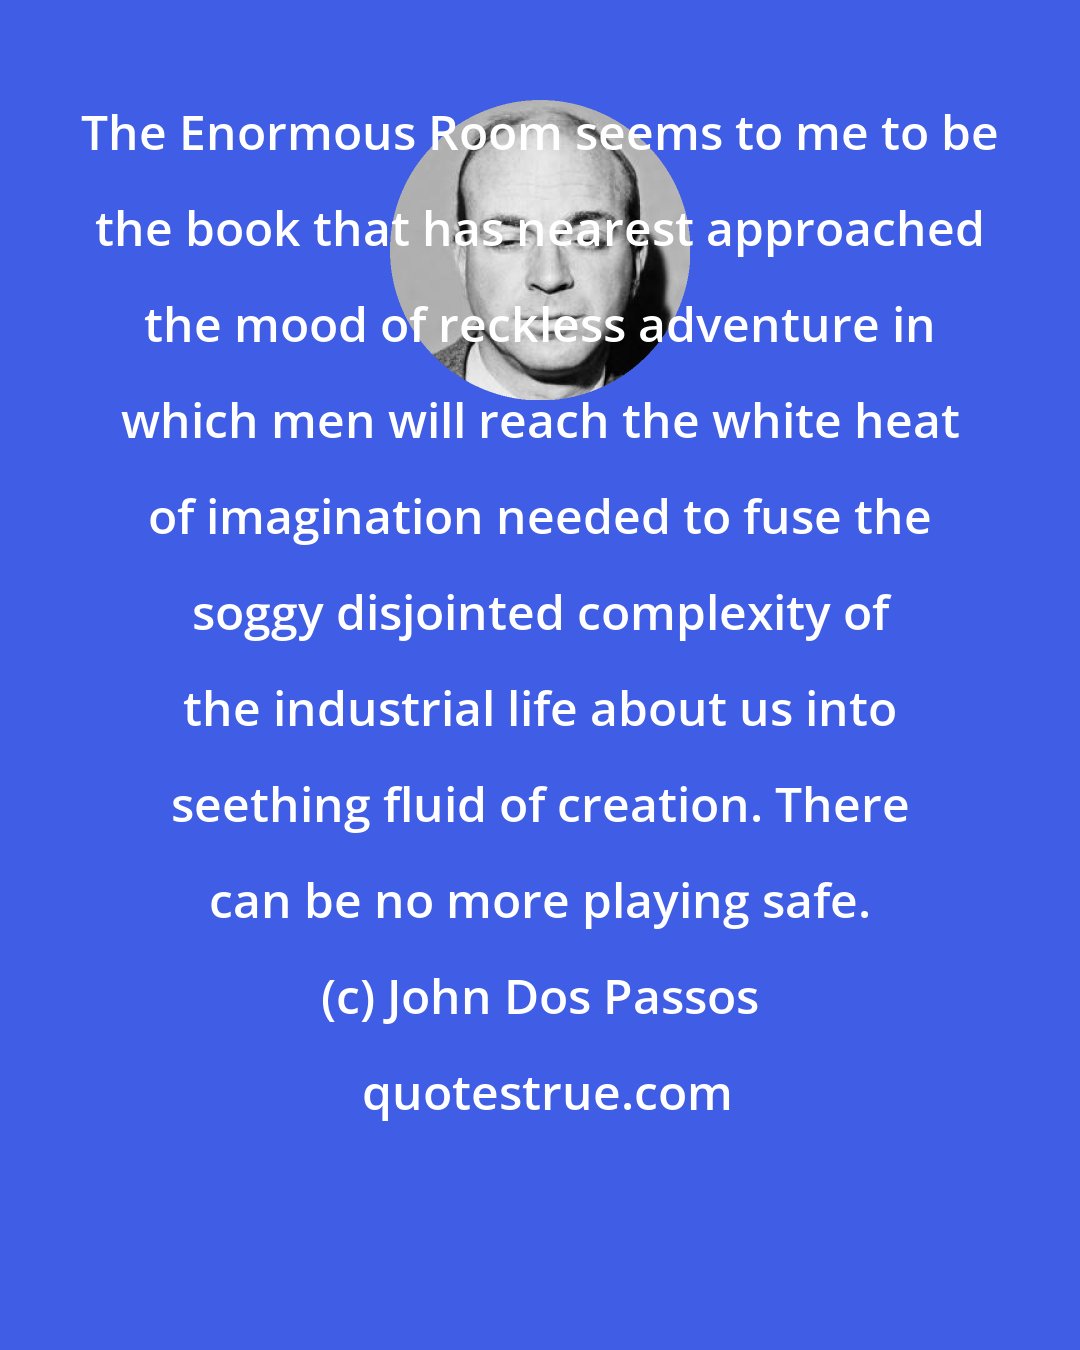 John Dos Passos: The Enormous Room seems to me to be the book that has nearest approached the mood of reckless adventure in which men will reach the white heat of imagination needed to fuse the soggy disjointed complexity of the industrial life about us into seething fluid of creation. There can be no more playing safe.